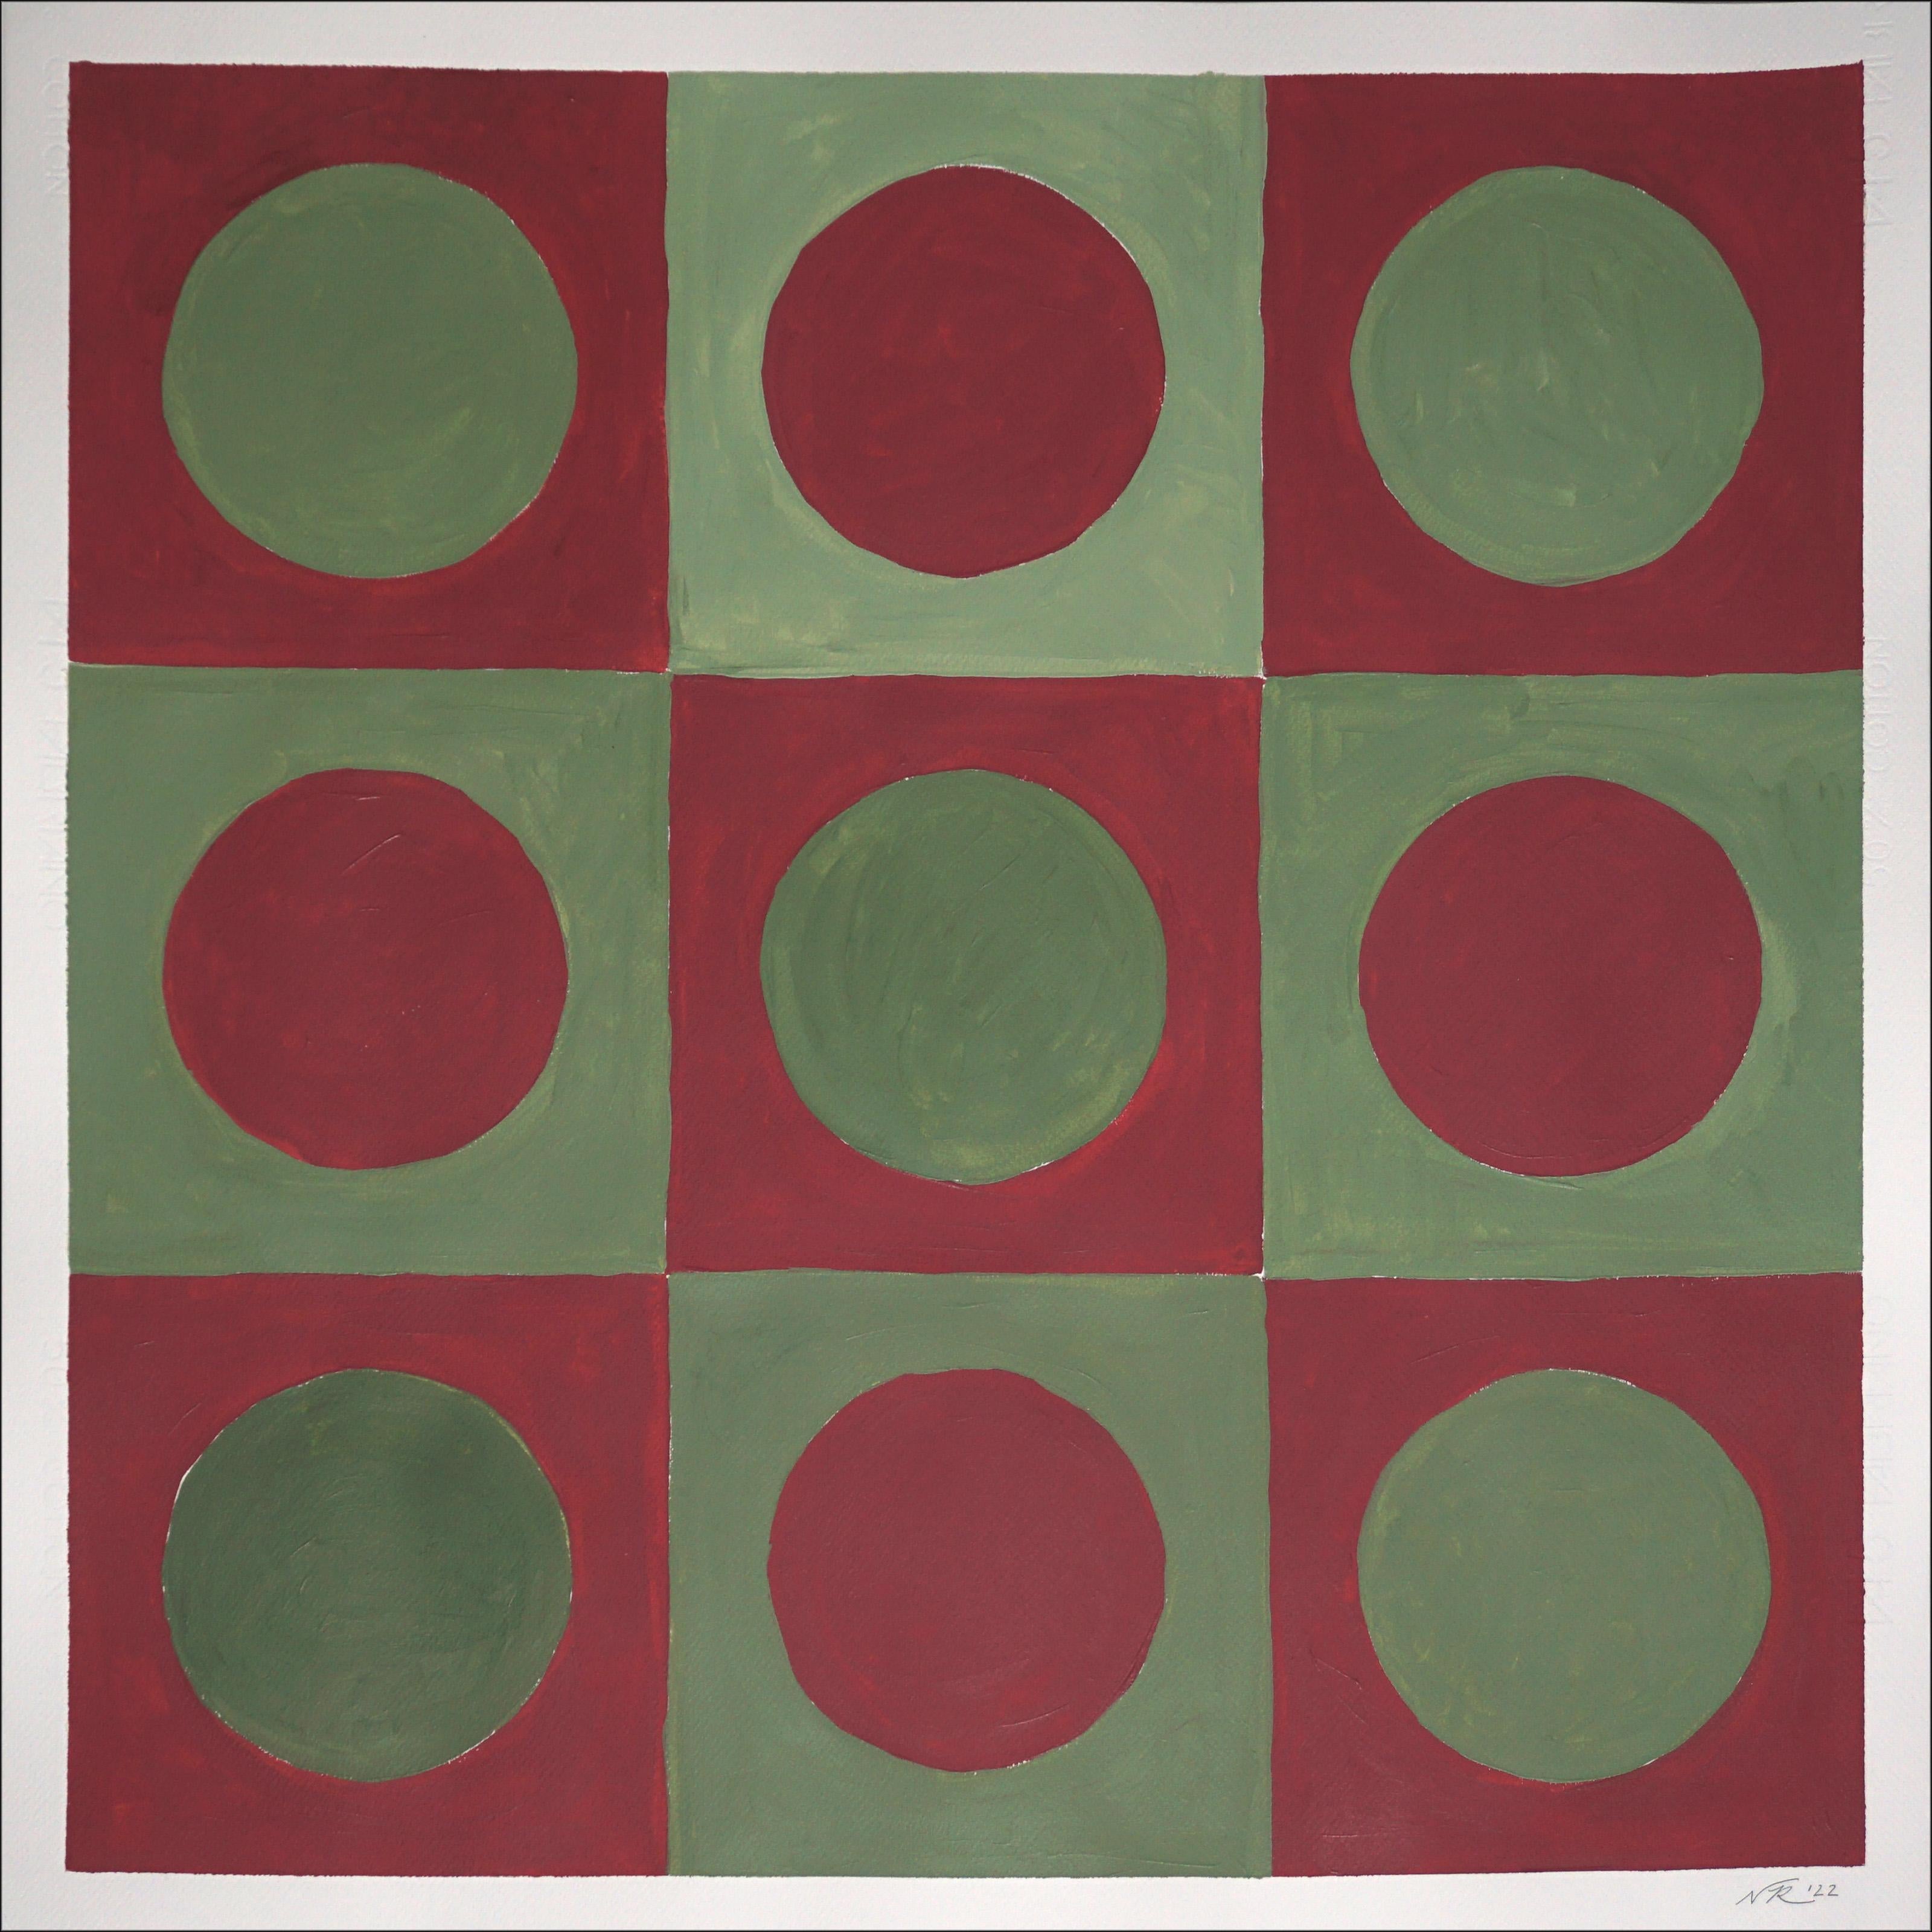 Forest Tile Grid, Abstract Geometric Pattern in Green and Red, Classy Tones 2022